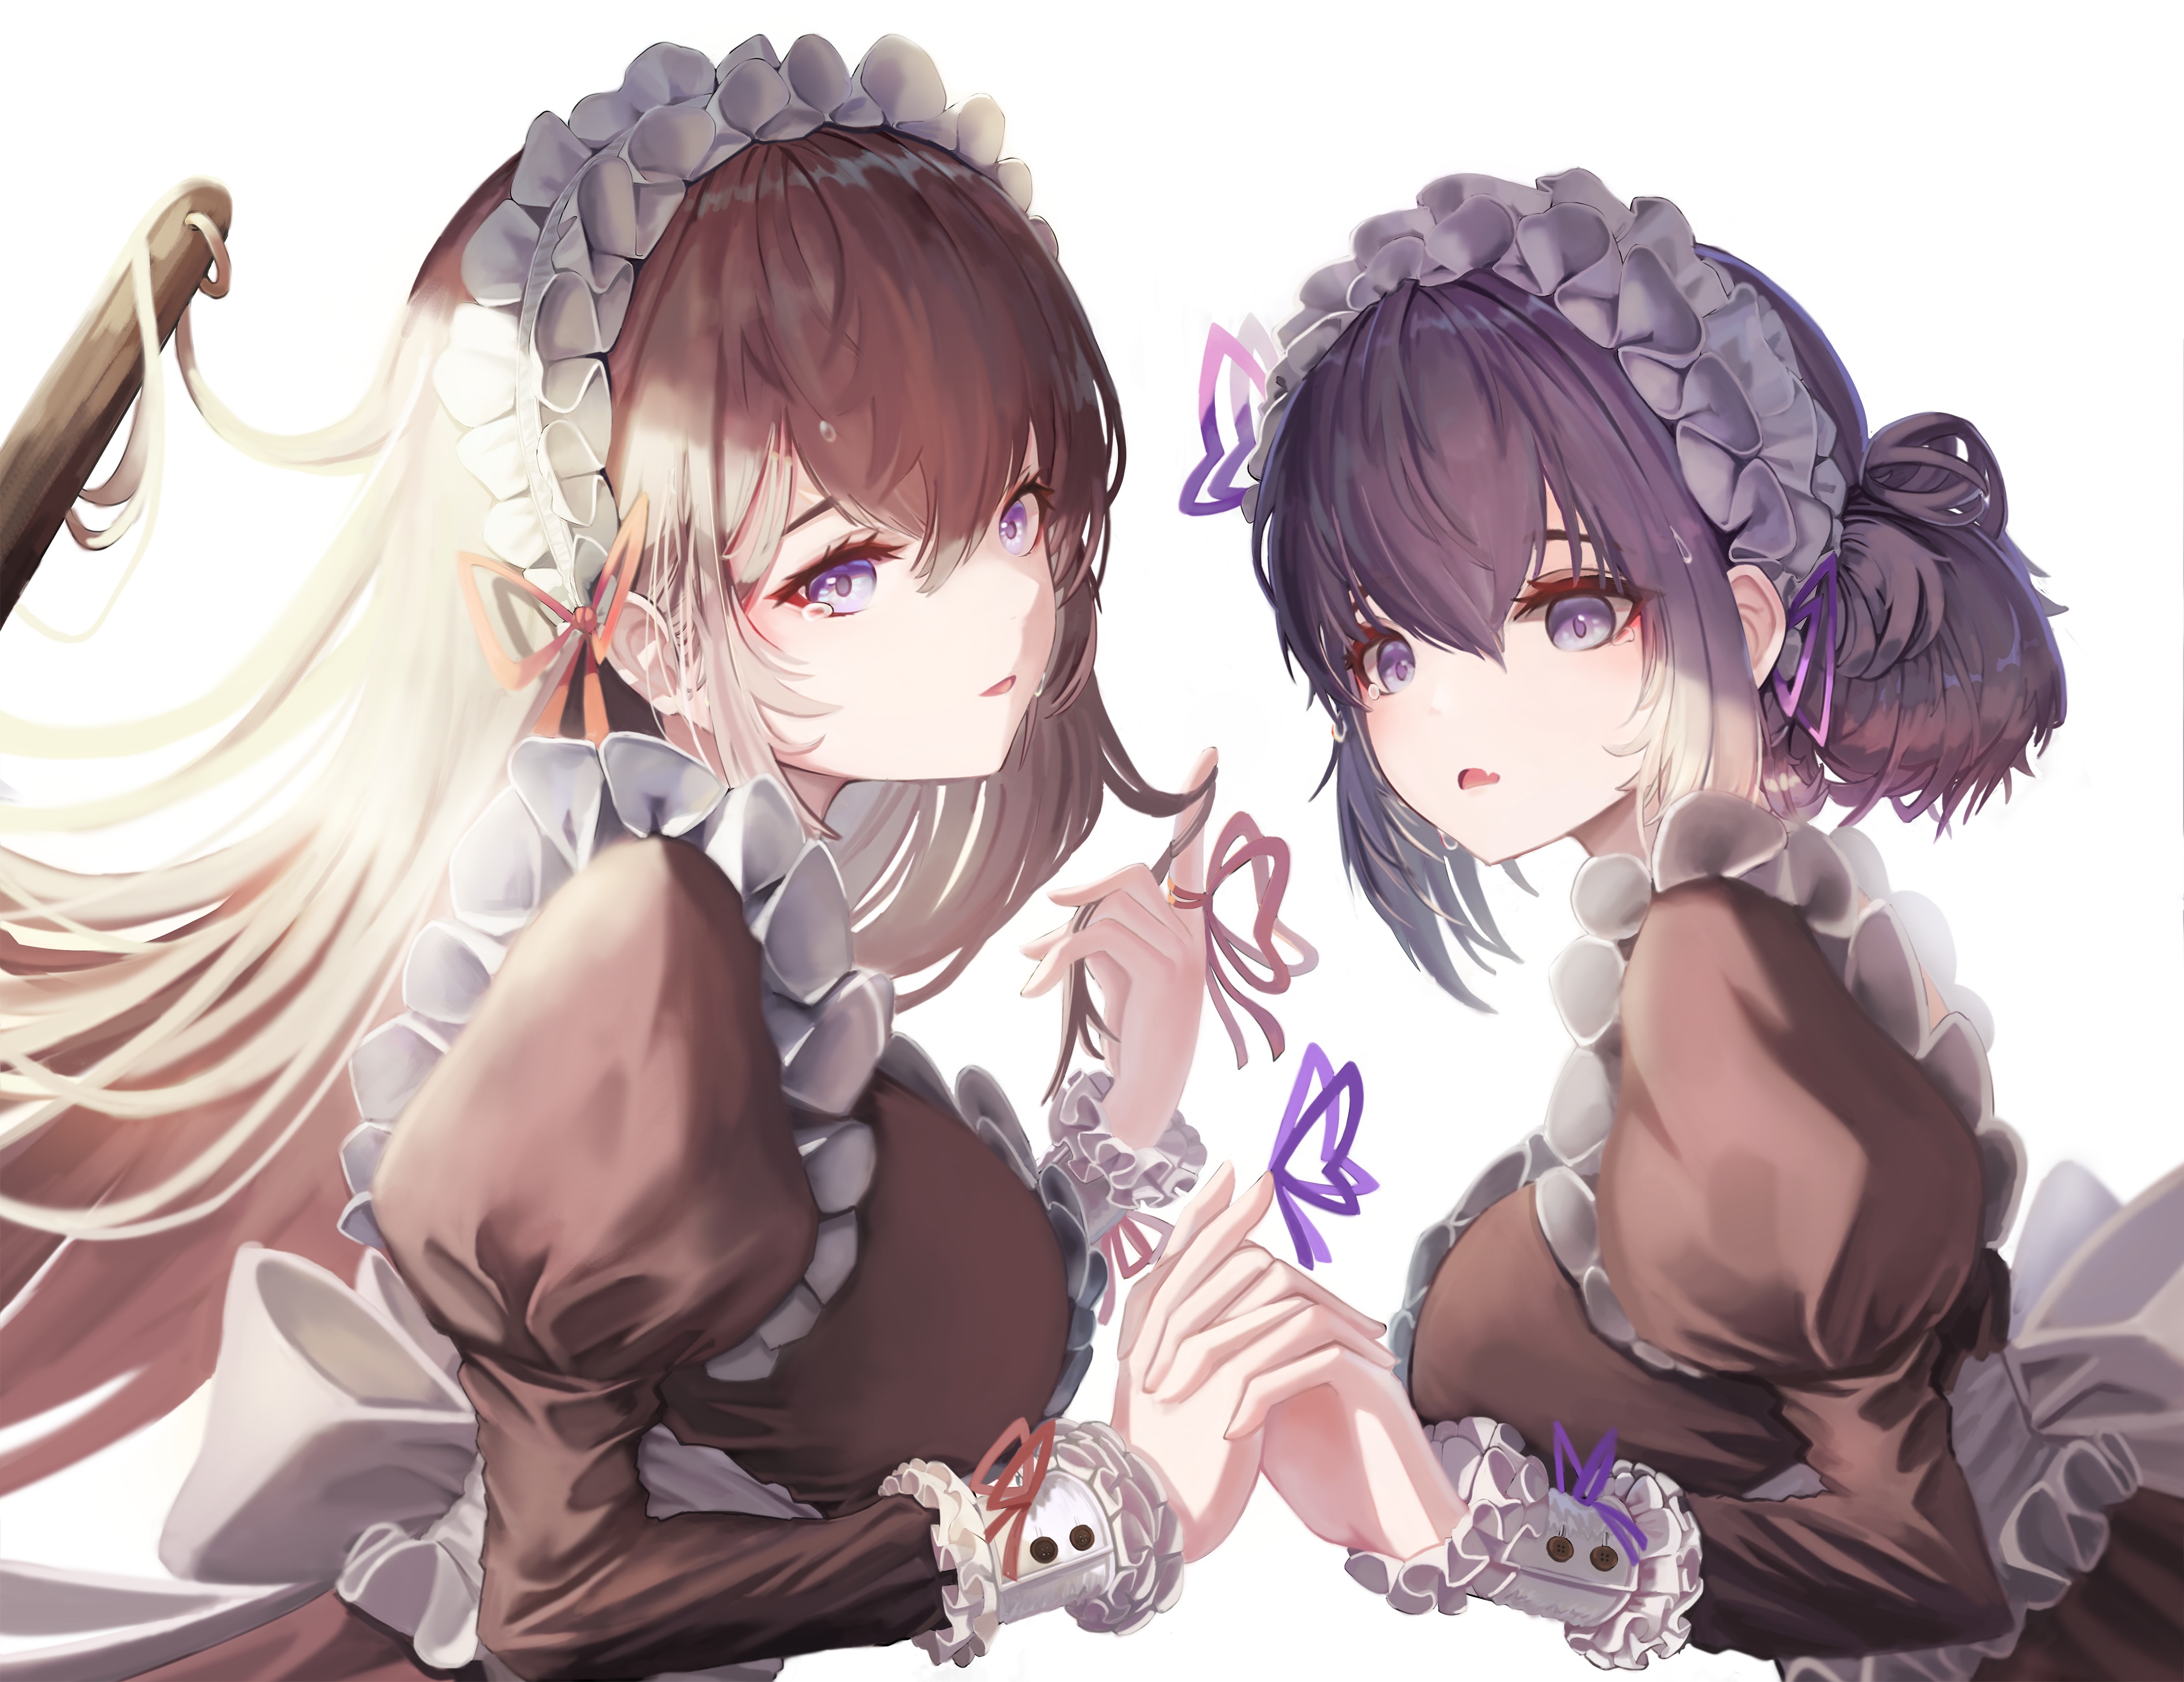 Anime Anime Girls L4timeria Artwork Maid Maid Outfit Brunette Purple Hair Purple Eyes Holding Hands 3780x2912